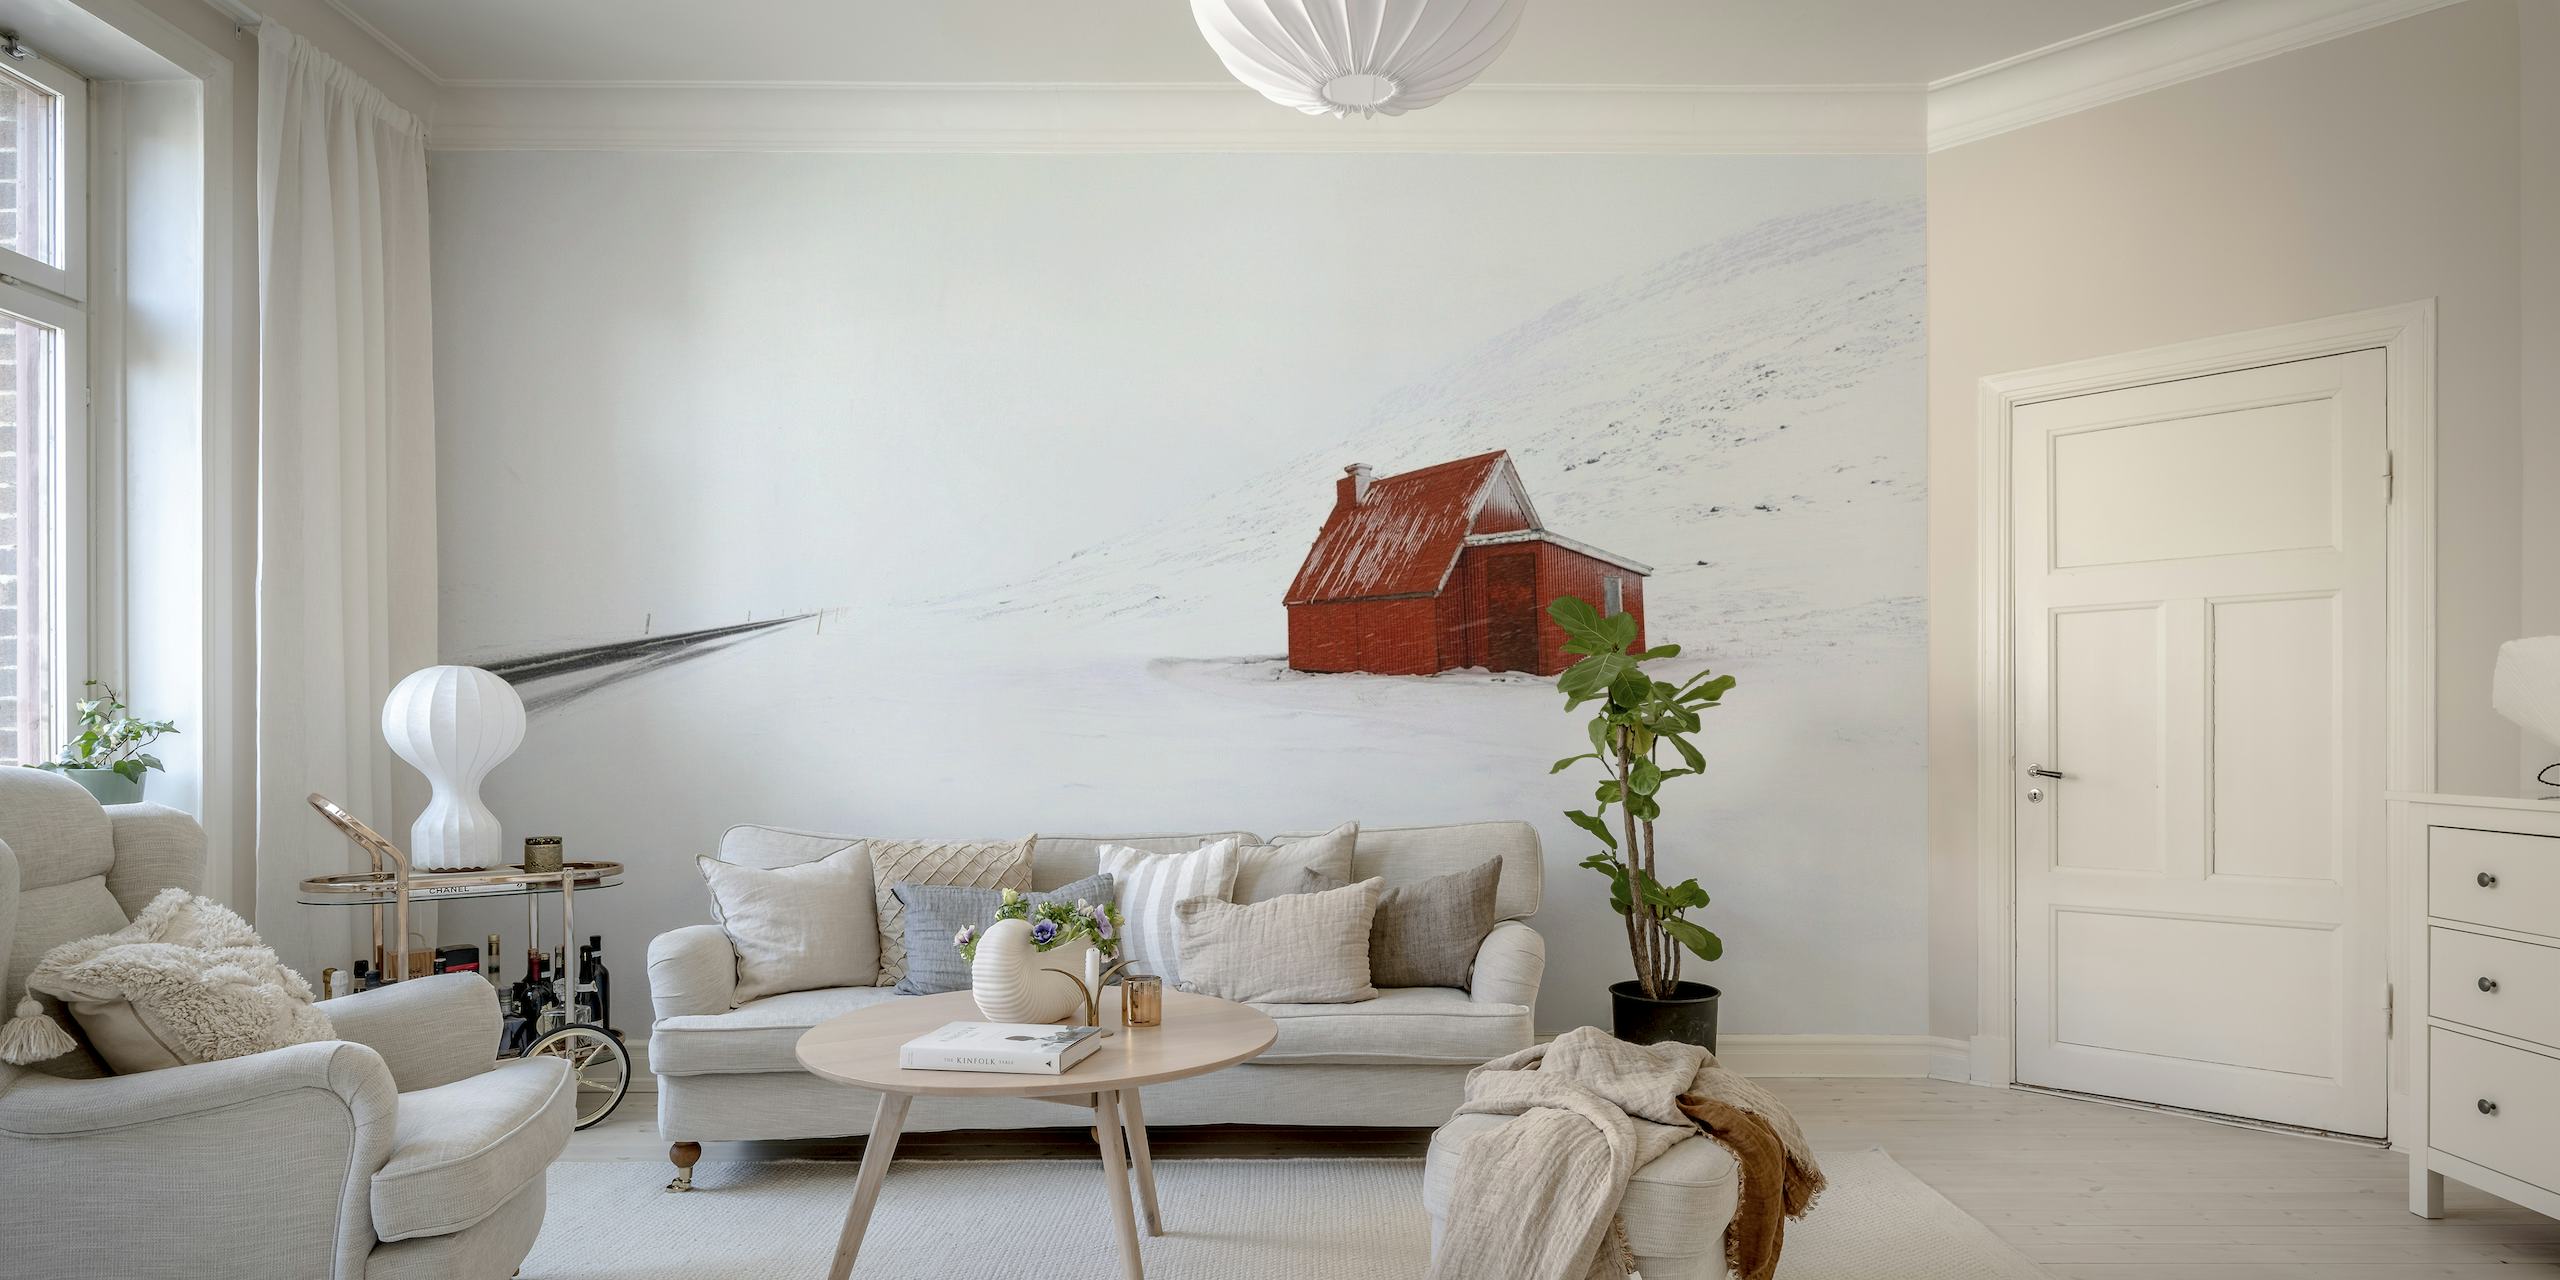 Red little house in a snowy landscape wall mural